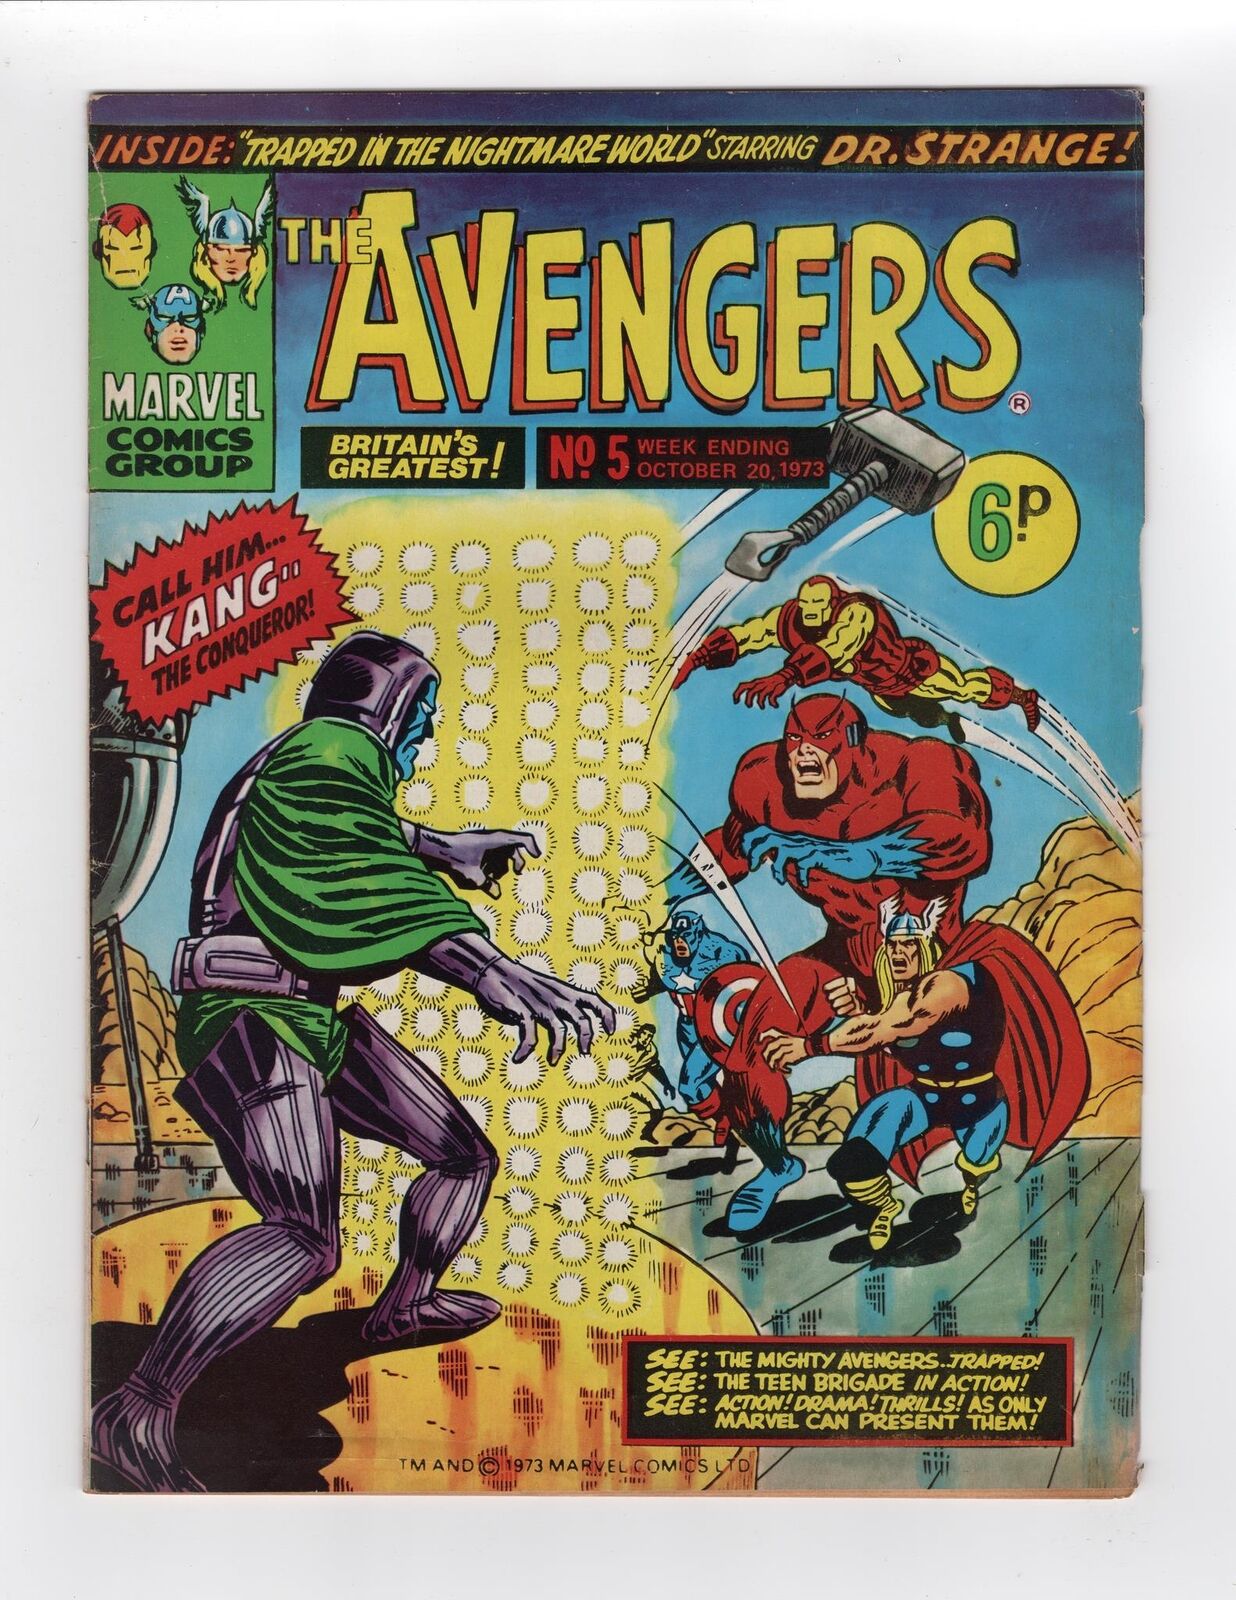 1964 MARVEL AVENGERS #8 1ST APPEARANCE OF KANG THE CONQUEROR KEY GRAIL RARE UK